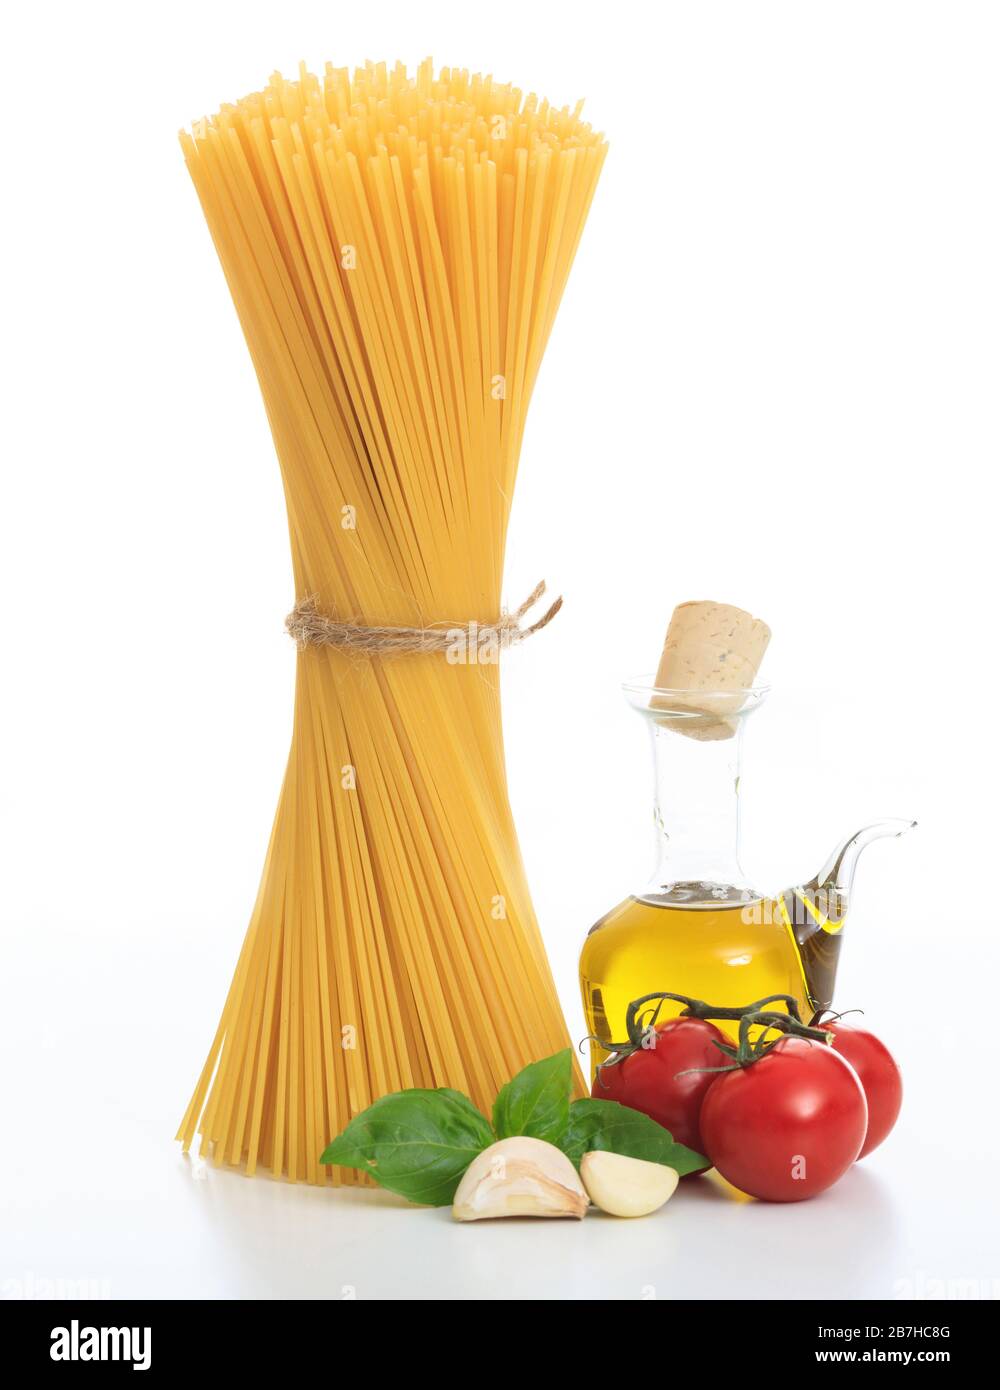 Pasta recipe concept. An uncooked bunch of raw spaghetti pasta, basil, tomatoes, olive oil and garlic on white background. Vertical portrait of tradit Stock Photo